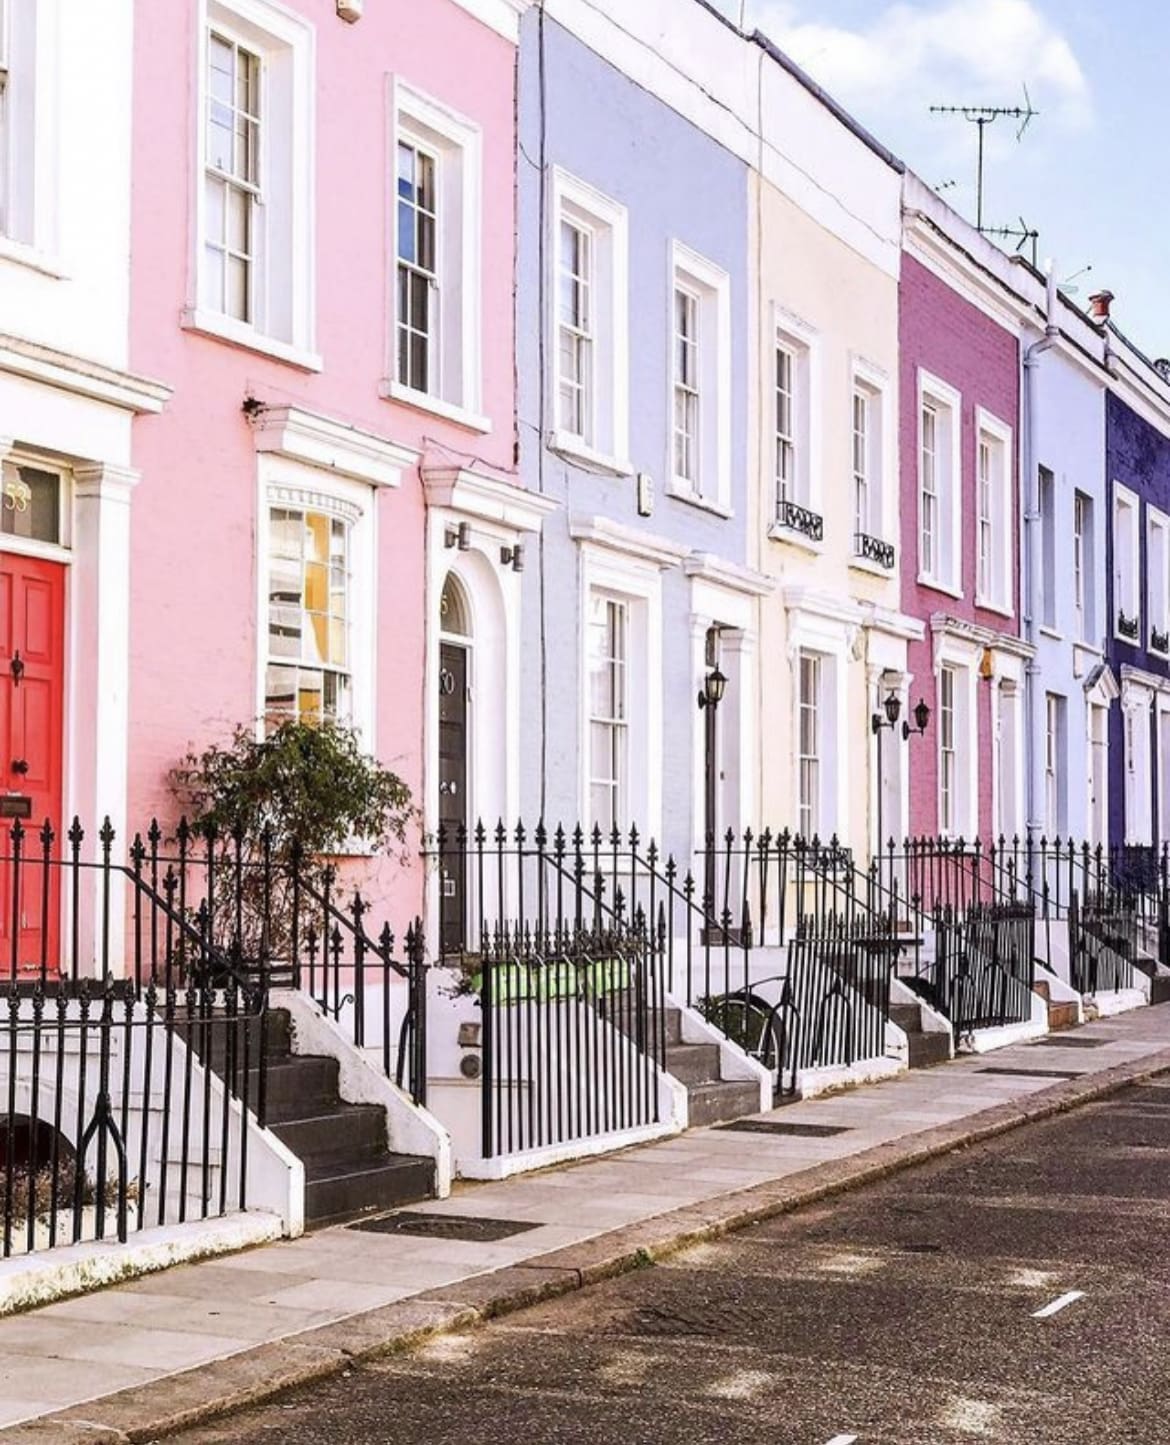 Colourful houses of Notting Hill, London